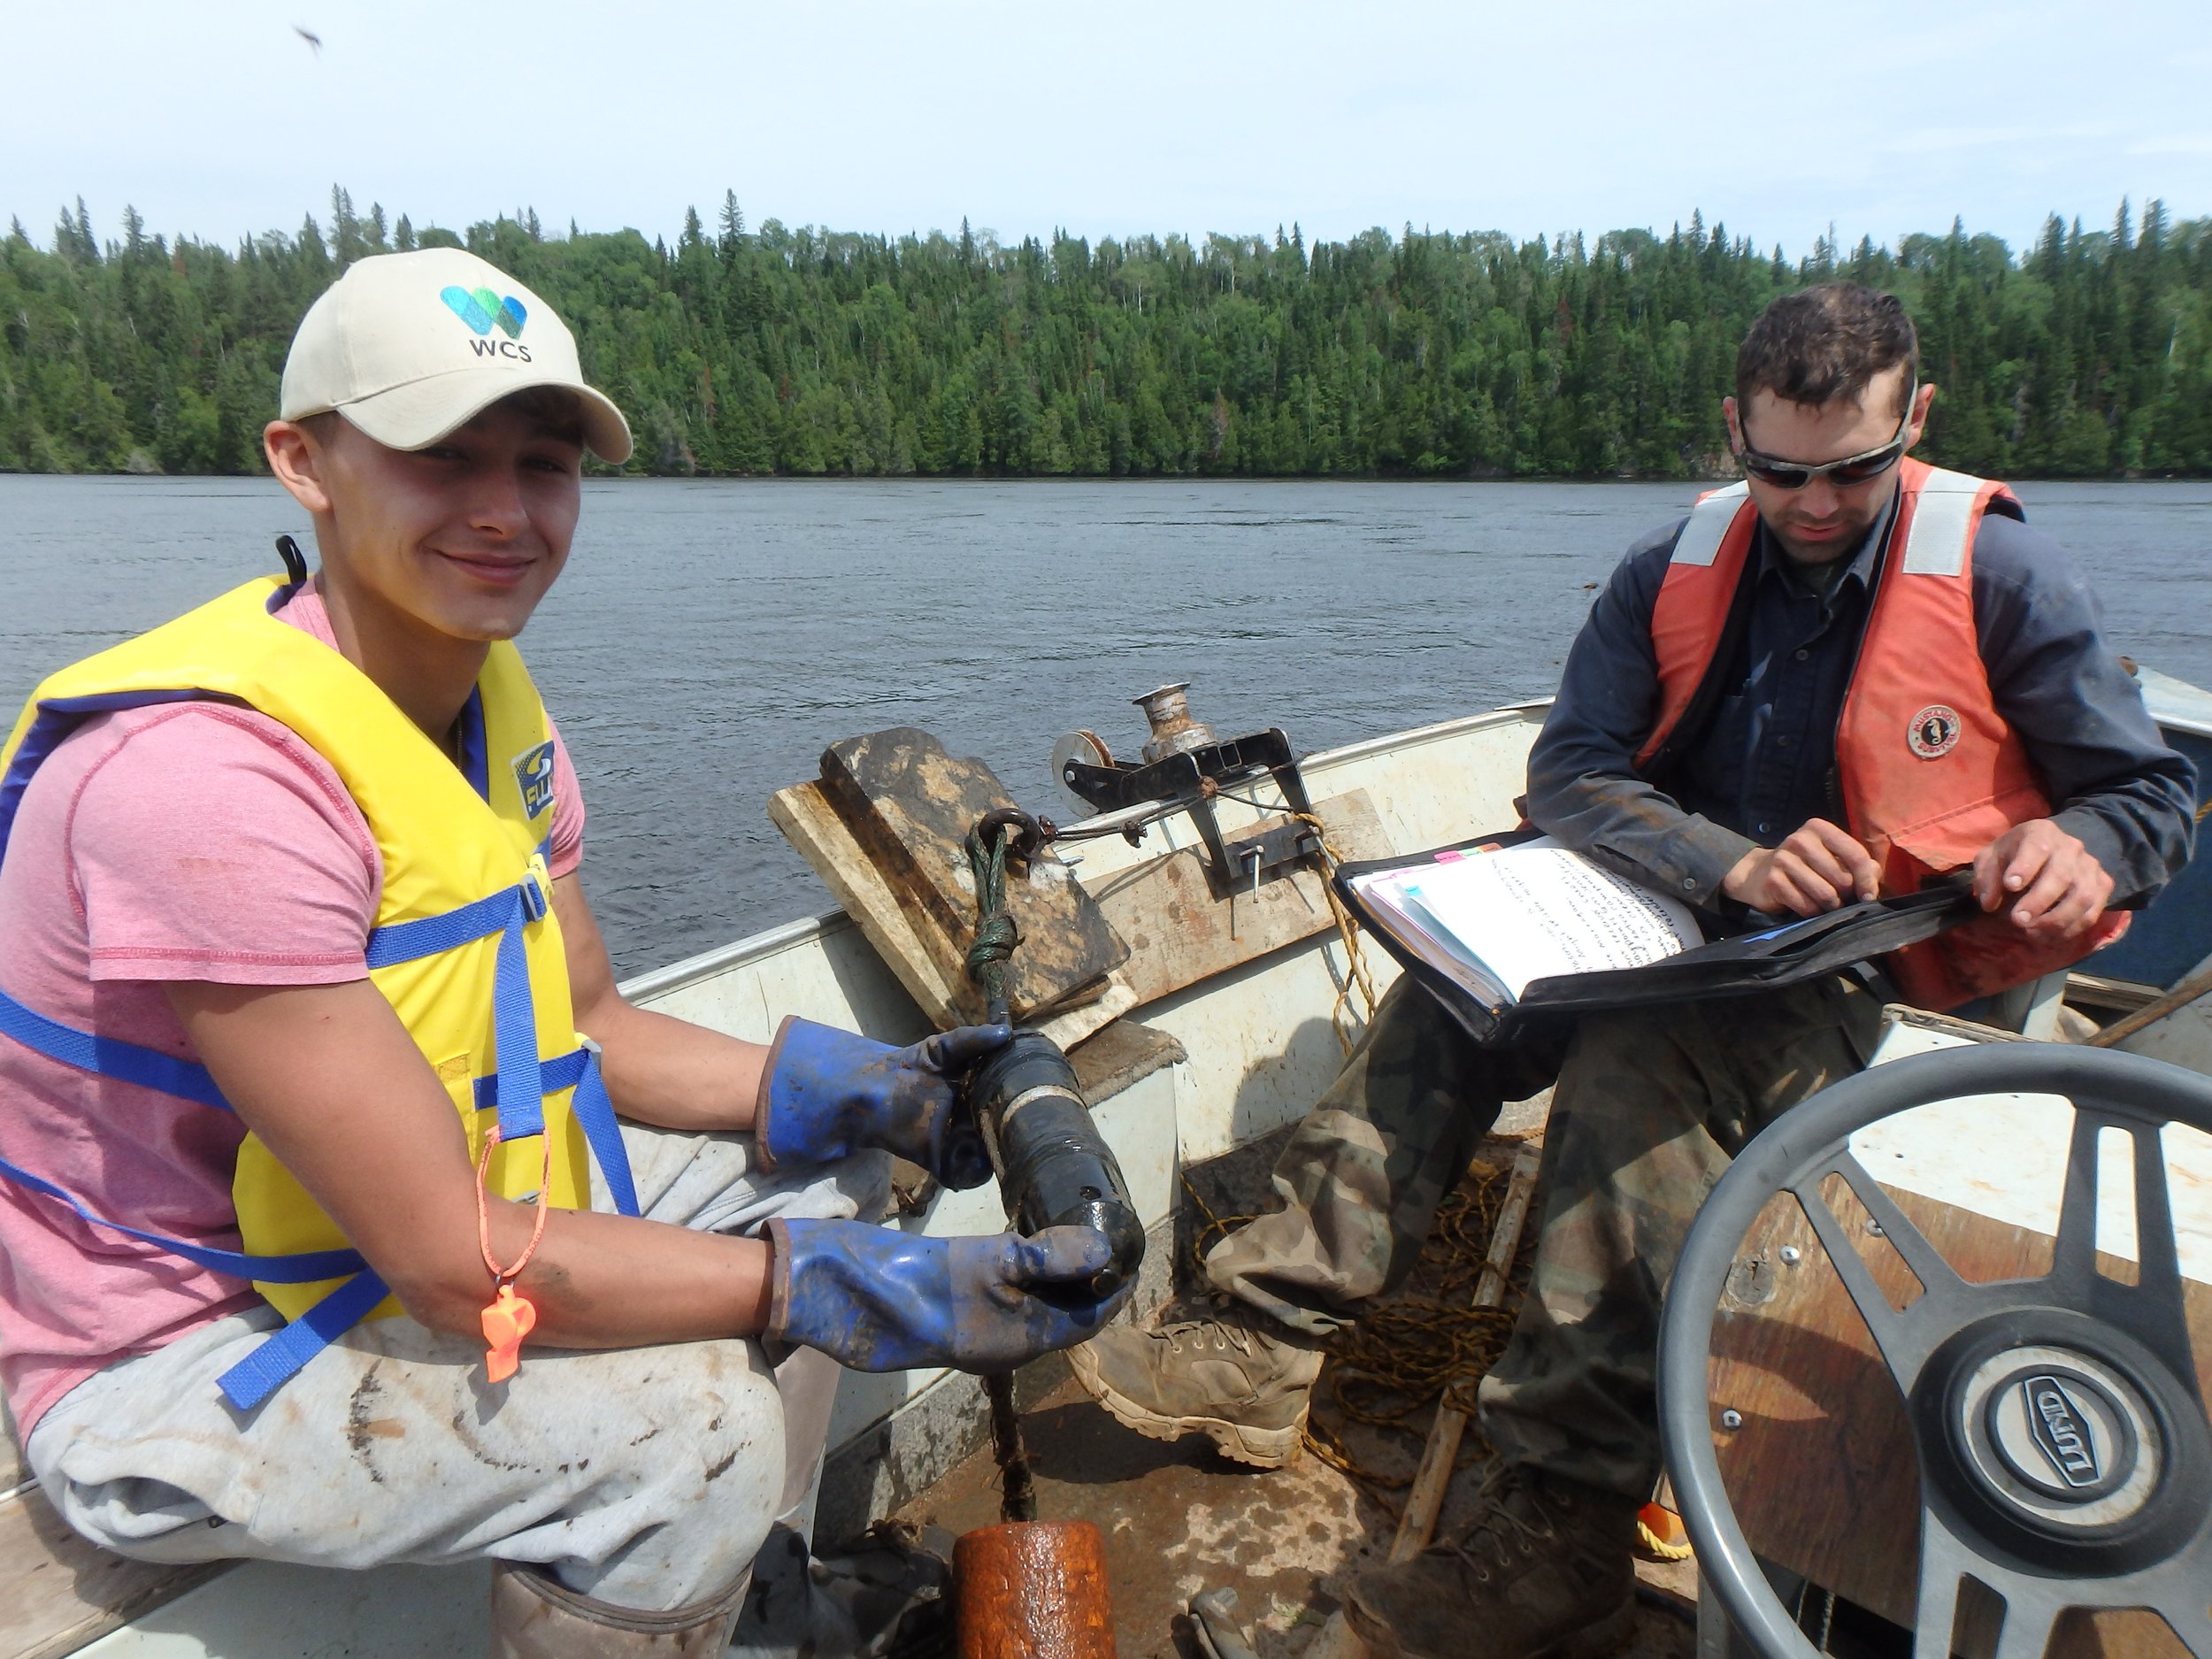 Justin Simard (left, MCFN youth) holds one of our underwater receivers that listen for tagged lake sturgeon. Jacob Seguin (WCS Canada) prepares equipment to keep the receivers working.